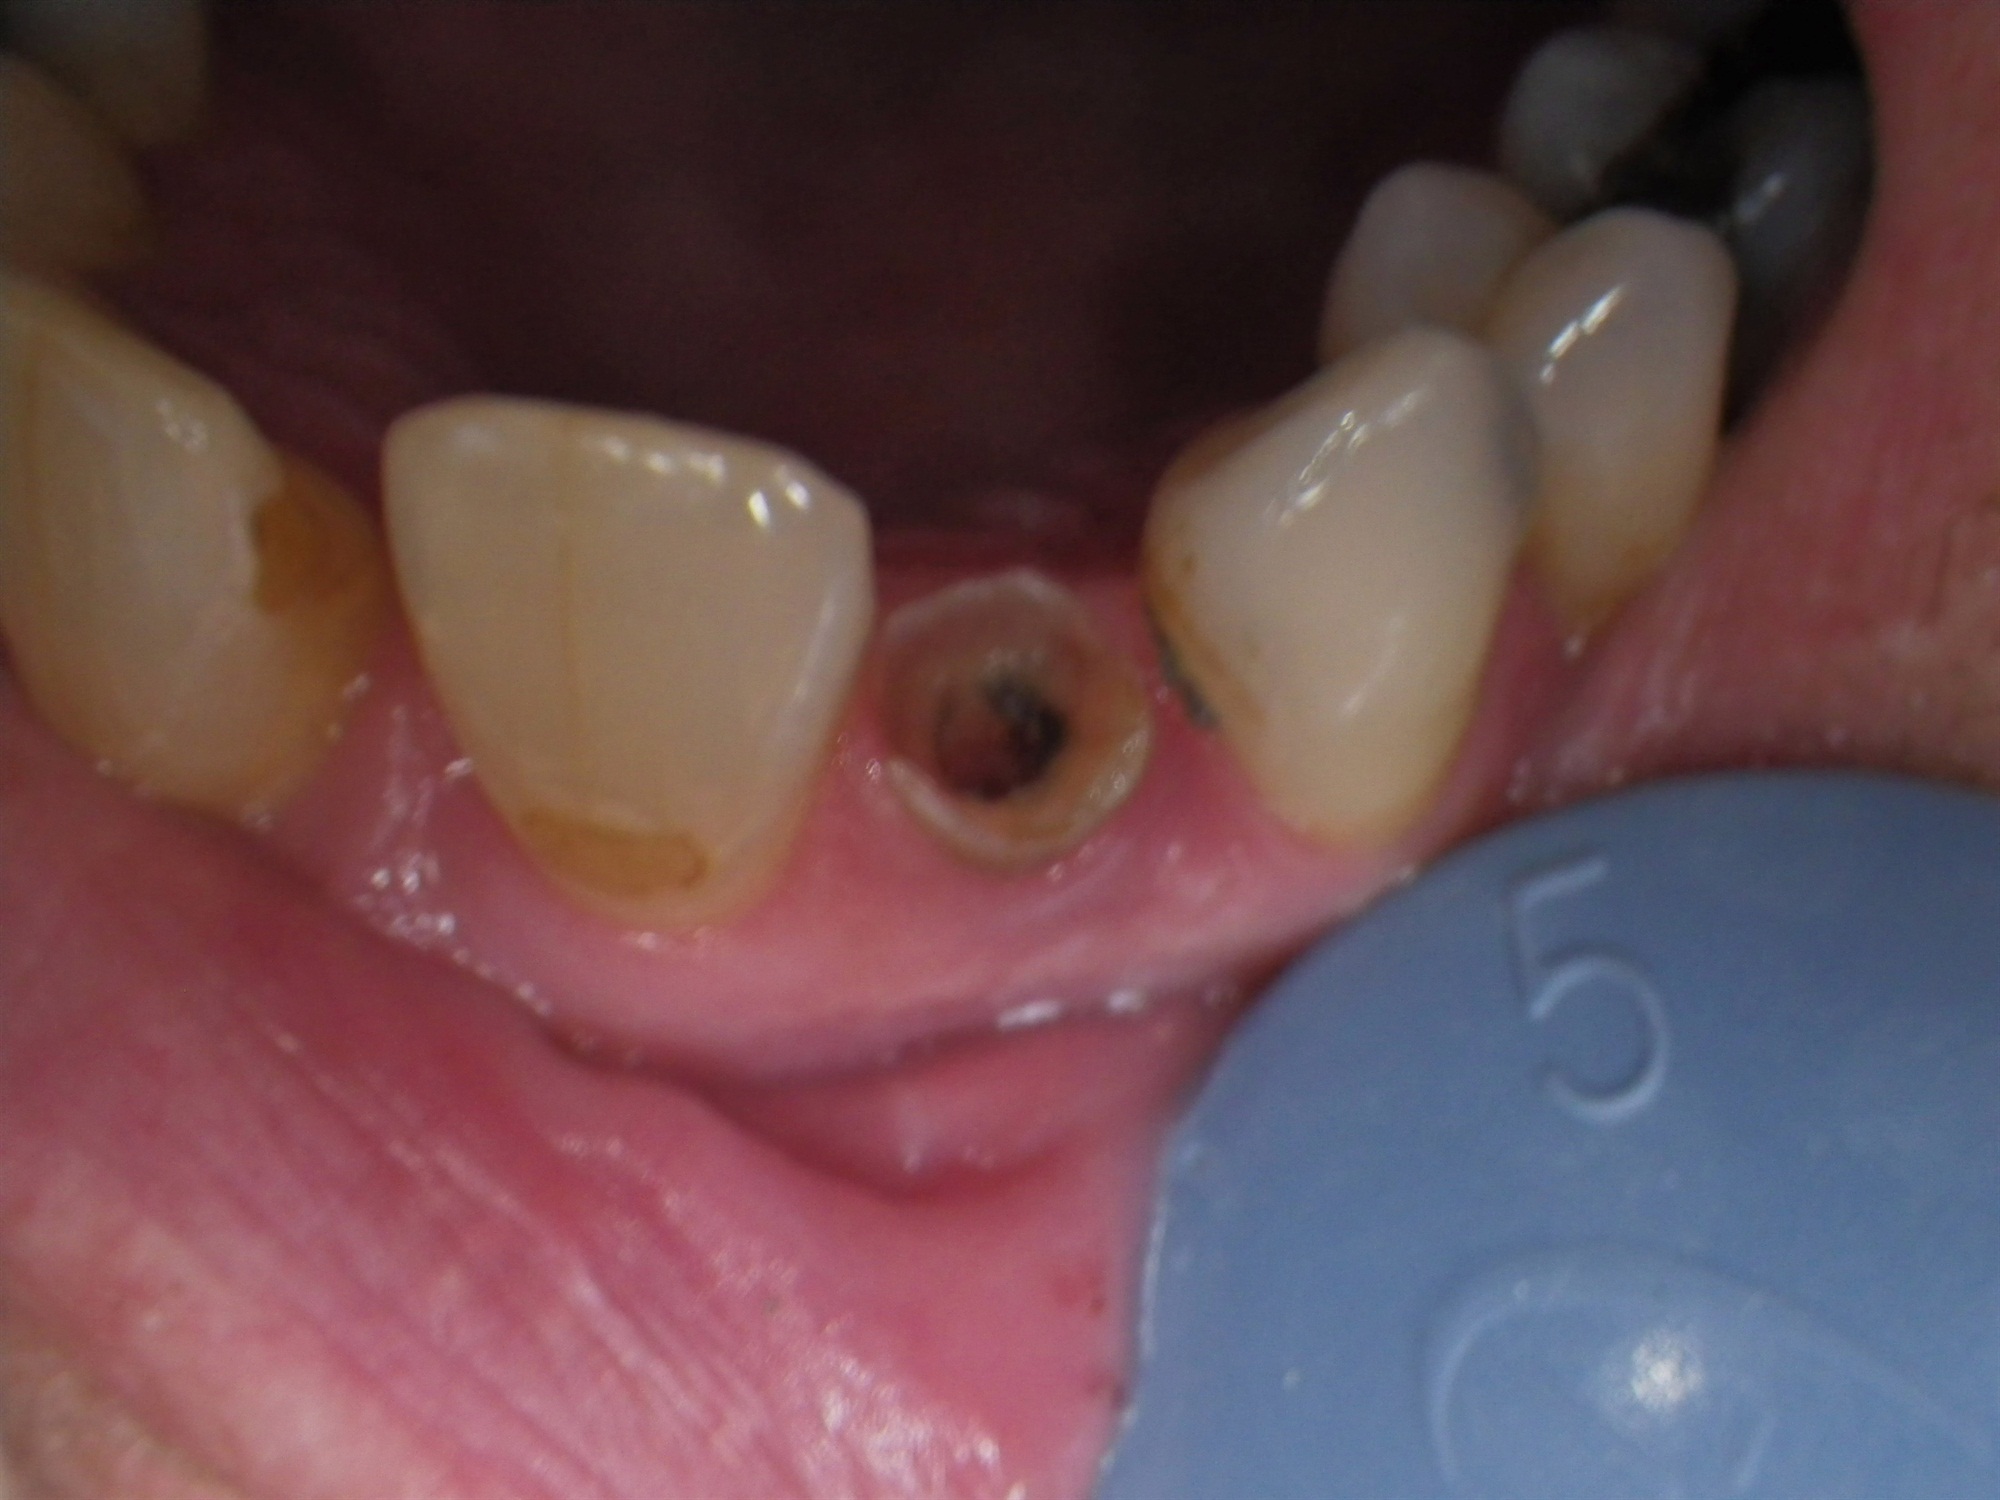 1. Endodontically treated tooth; Courtesy of Dr. Nelson, USA